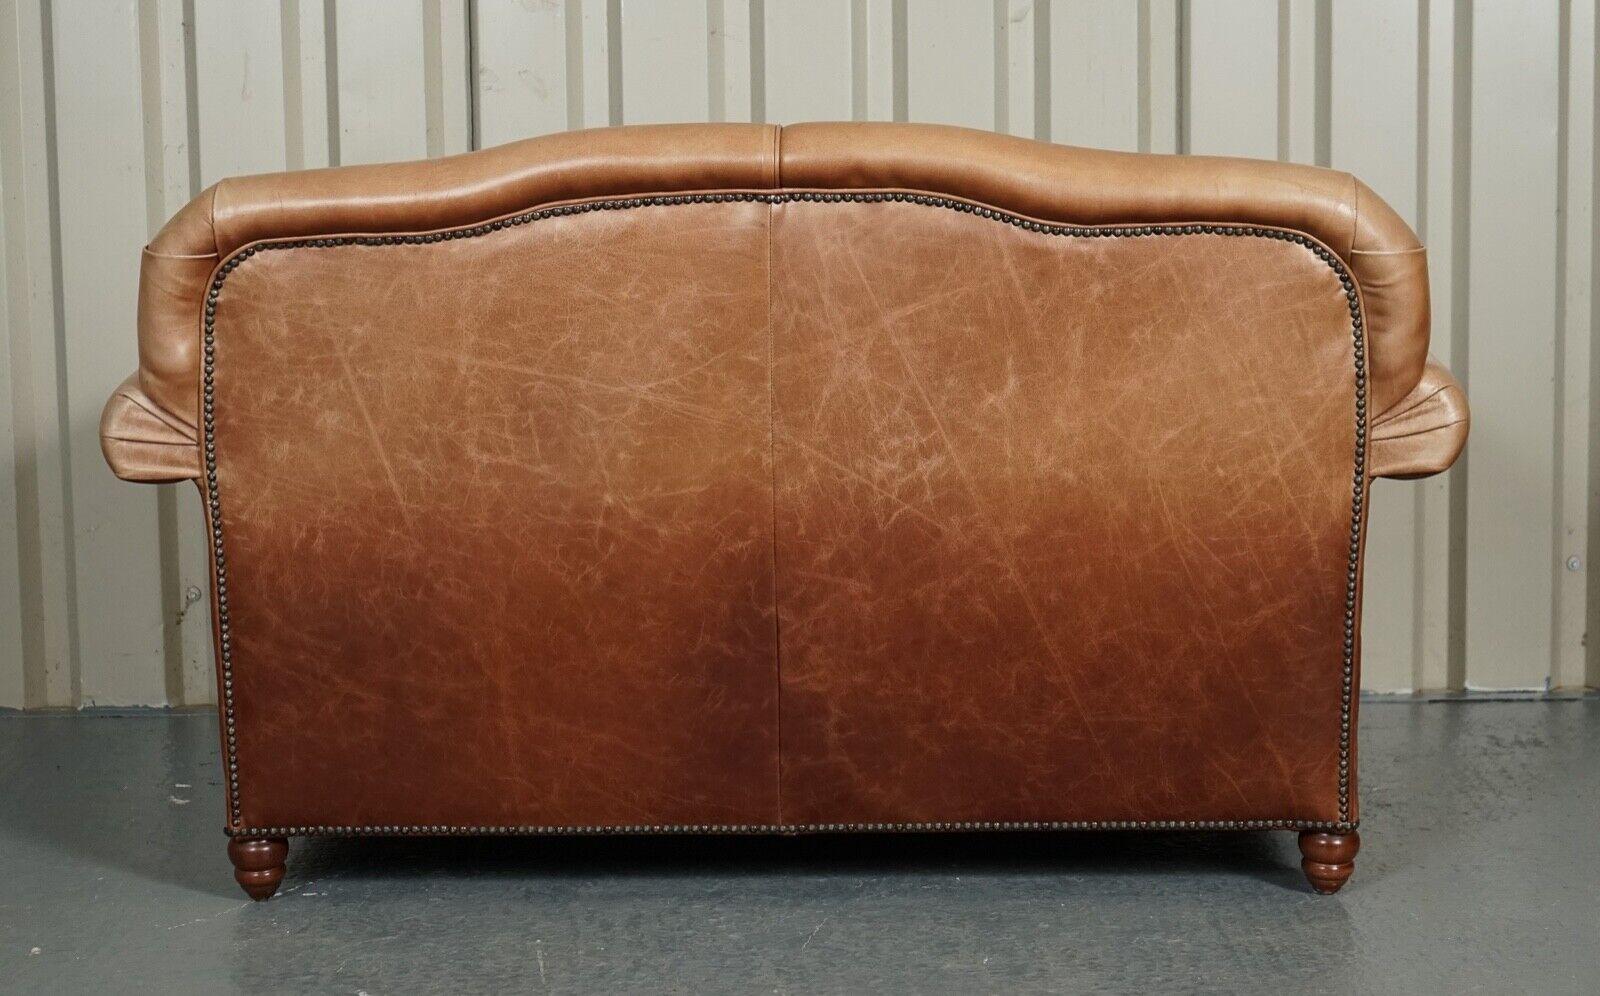 We are so excited to present to you this beautiful Laura Ashley brown leather two seater sofa.

A comfortable sofa, with some wear and minor fading on the back. 

We have lightly restored this by giving it a hand clean all over, hand waxed and